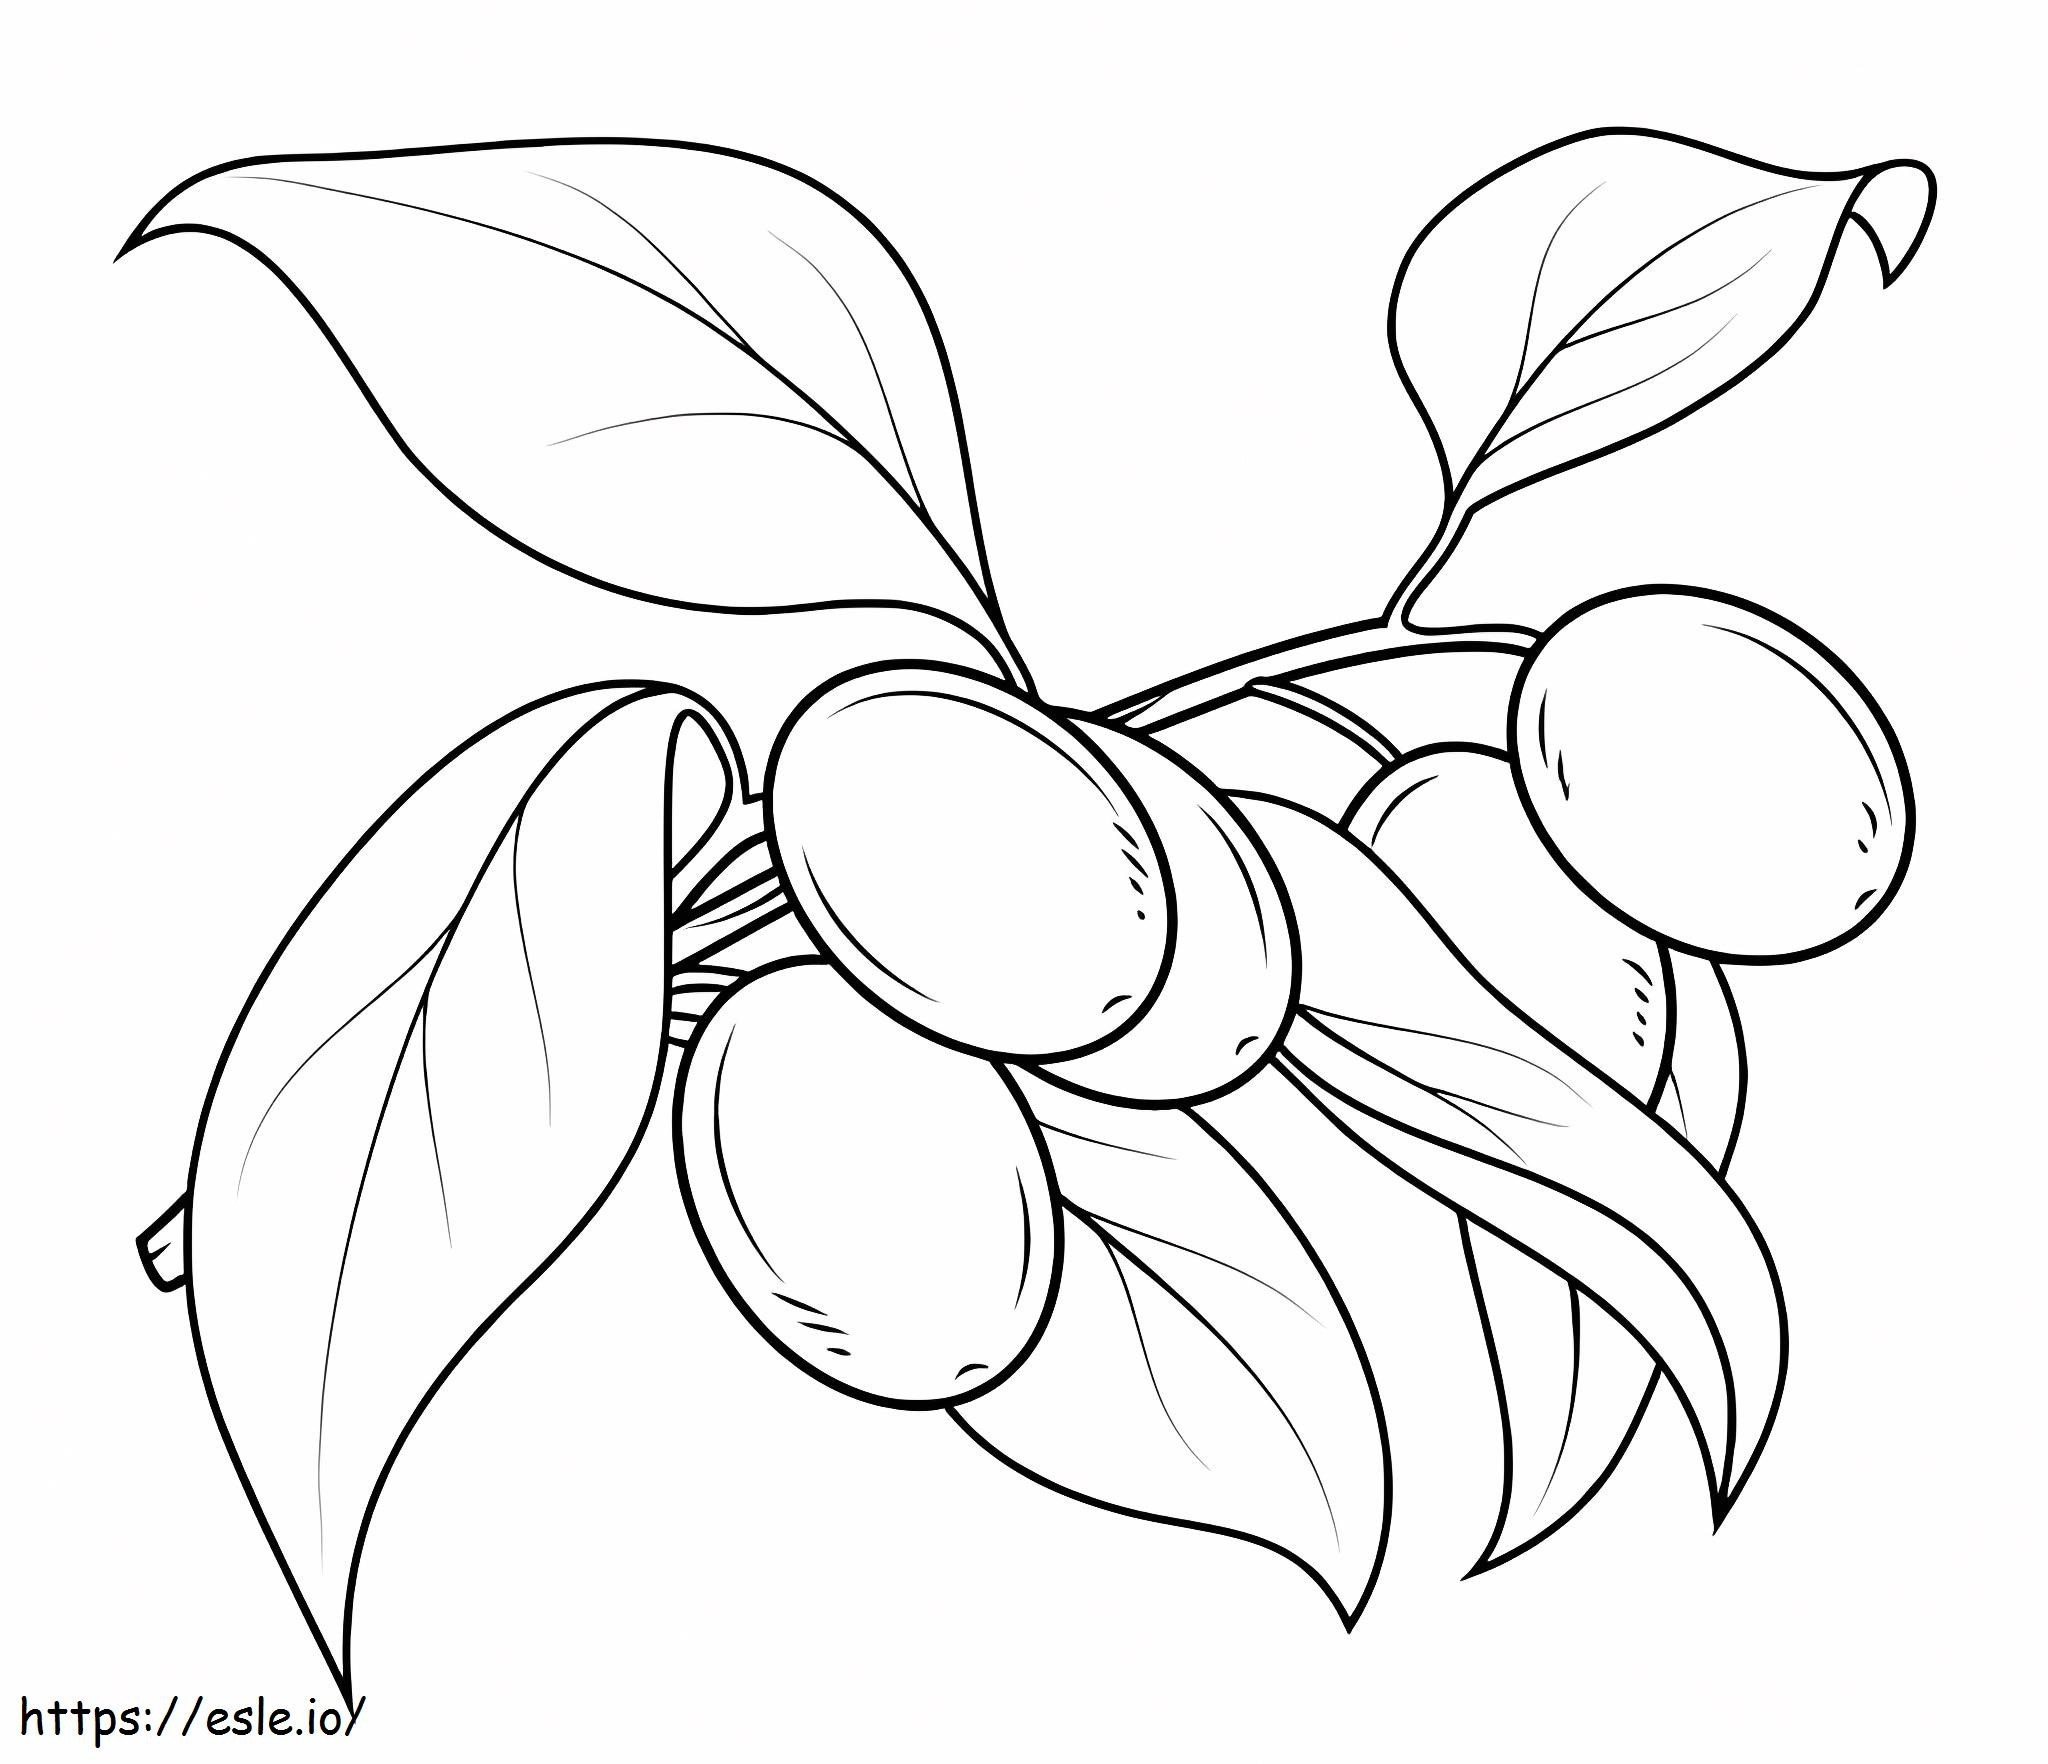 Kumquat With Leaf coloring page